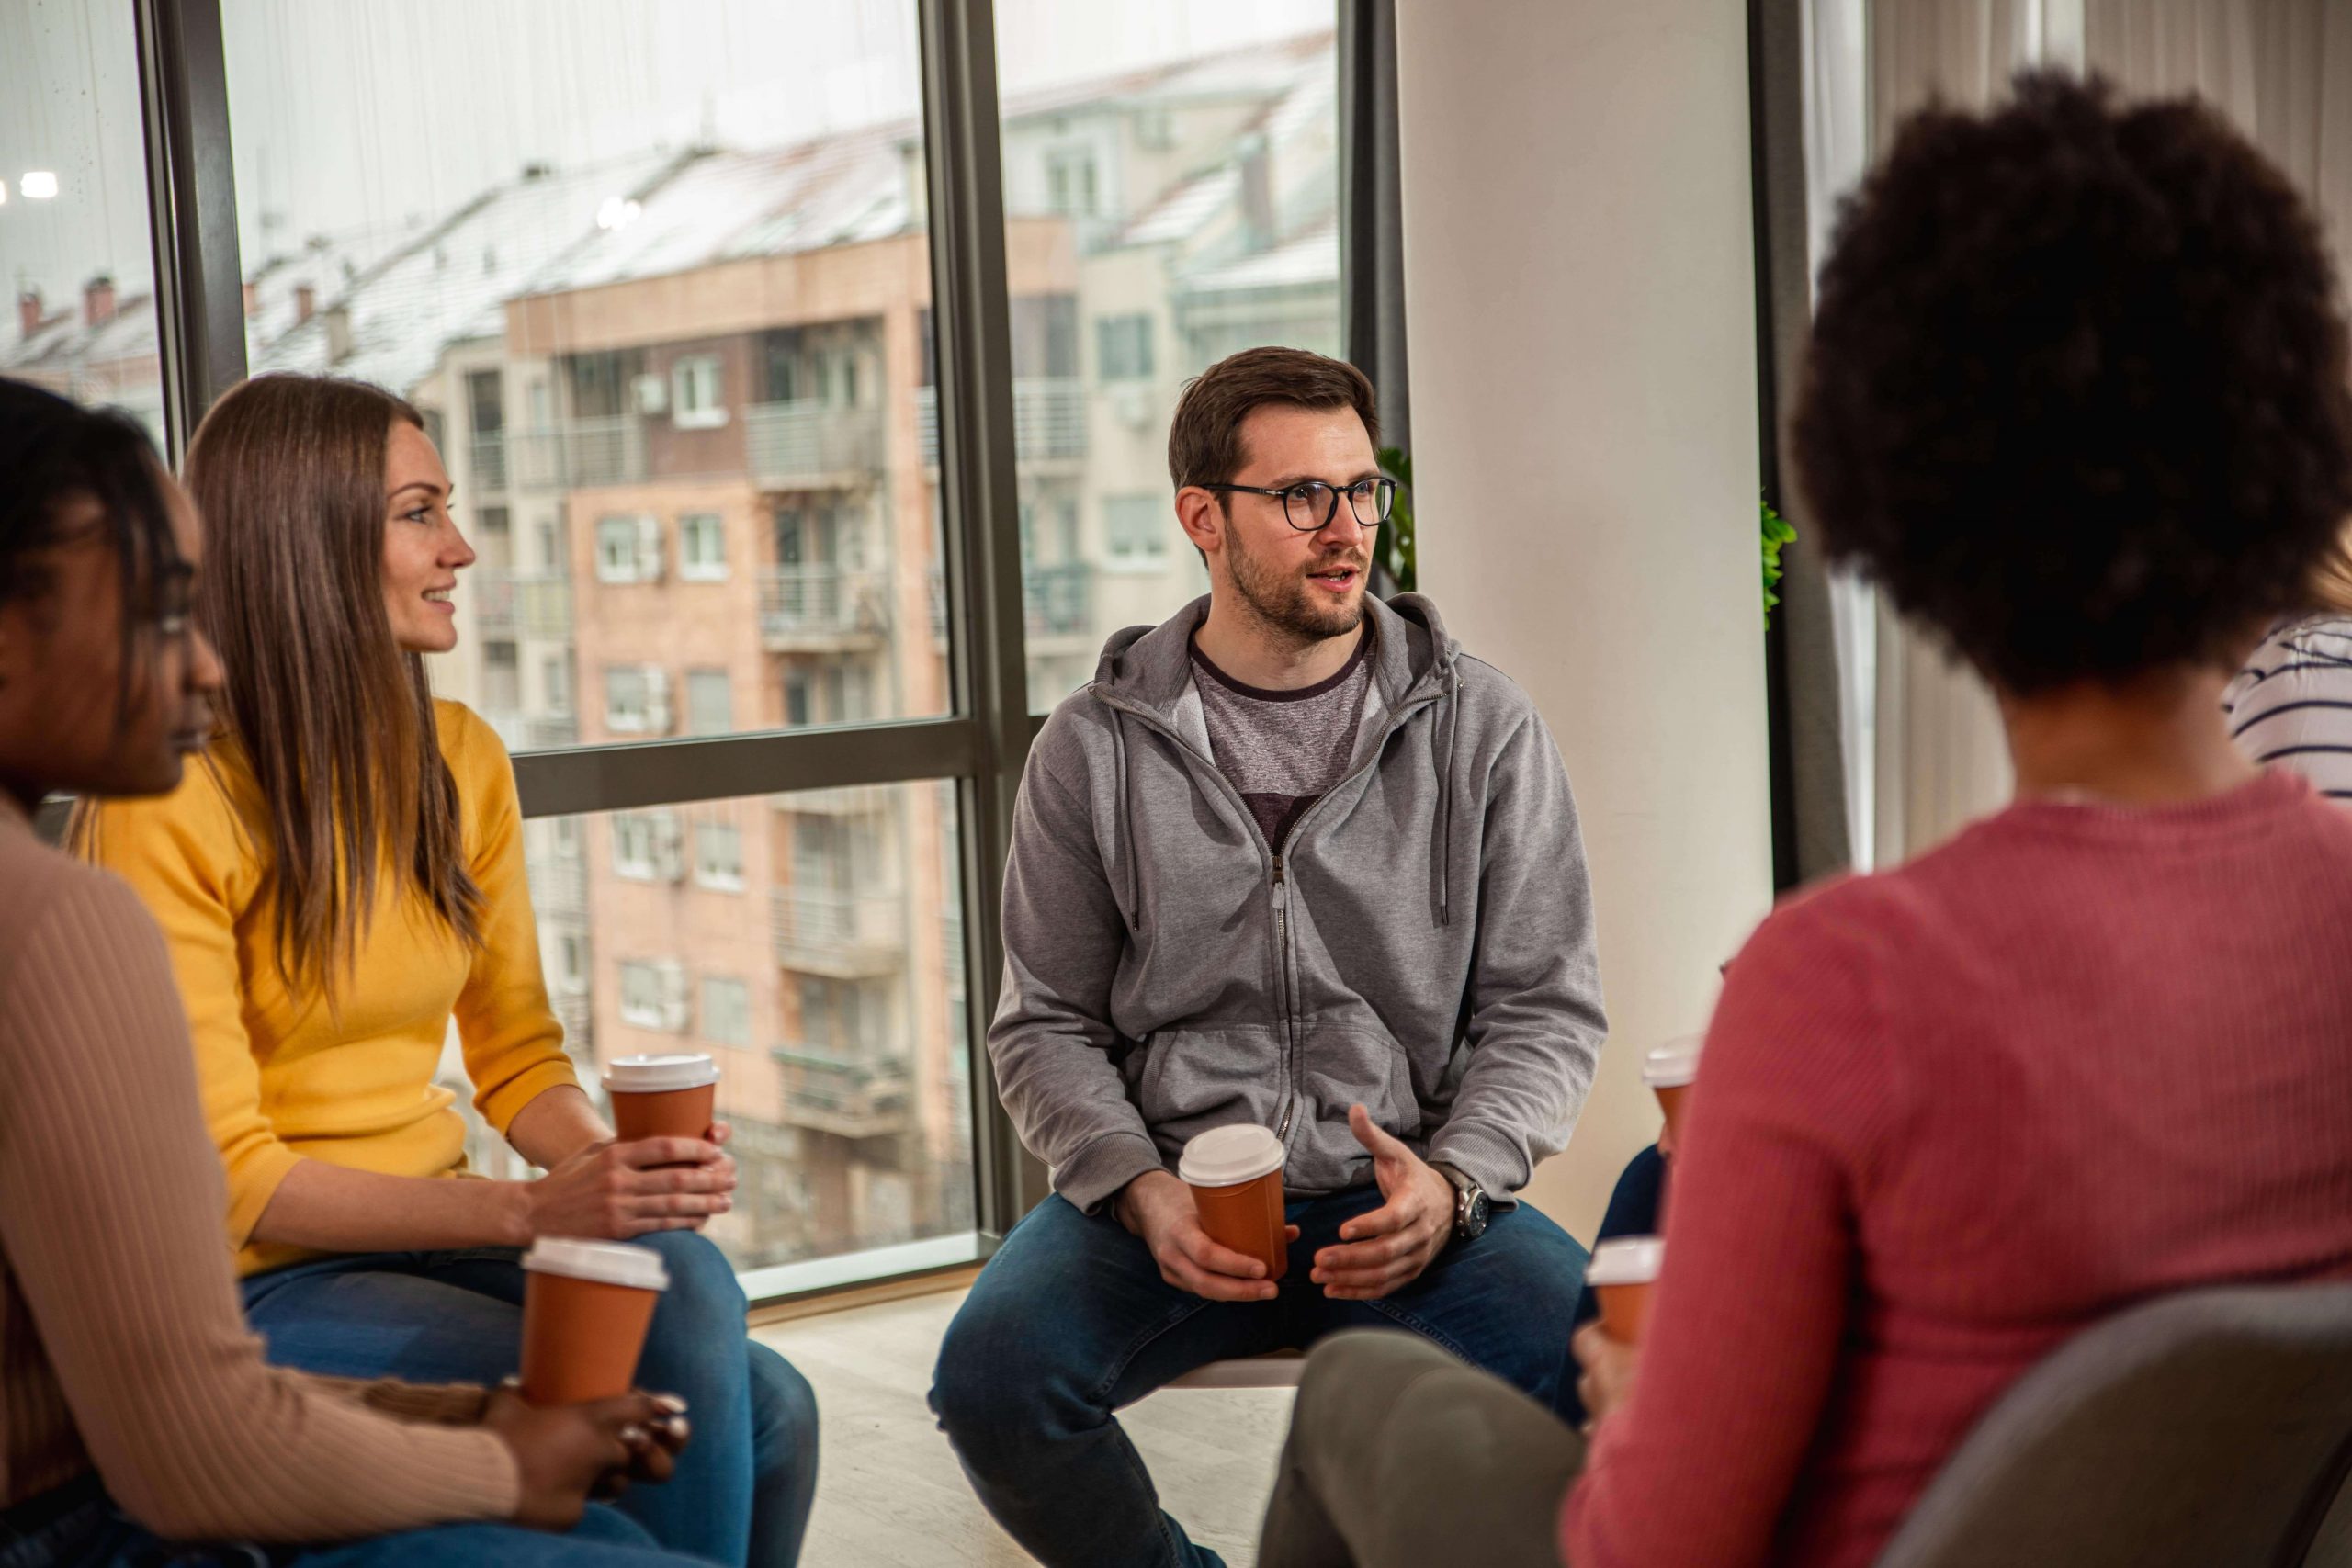 group therapy at outpatient drug rehab